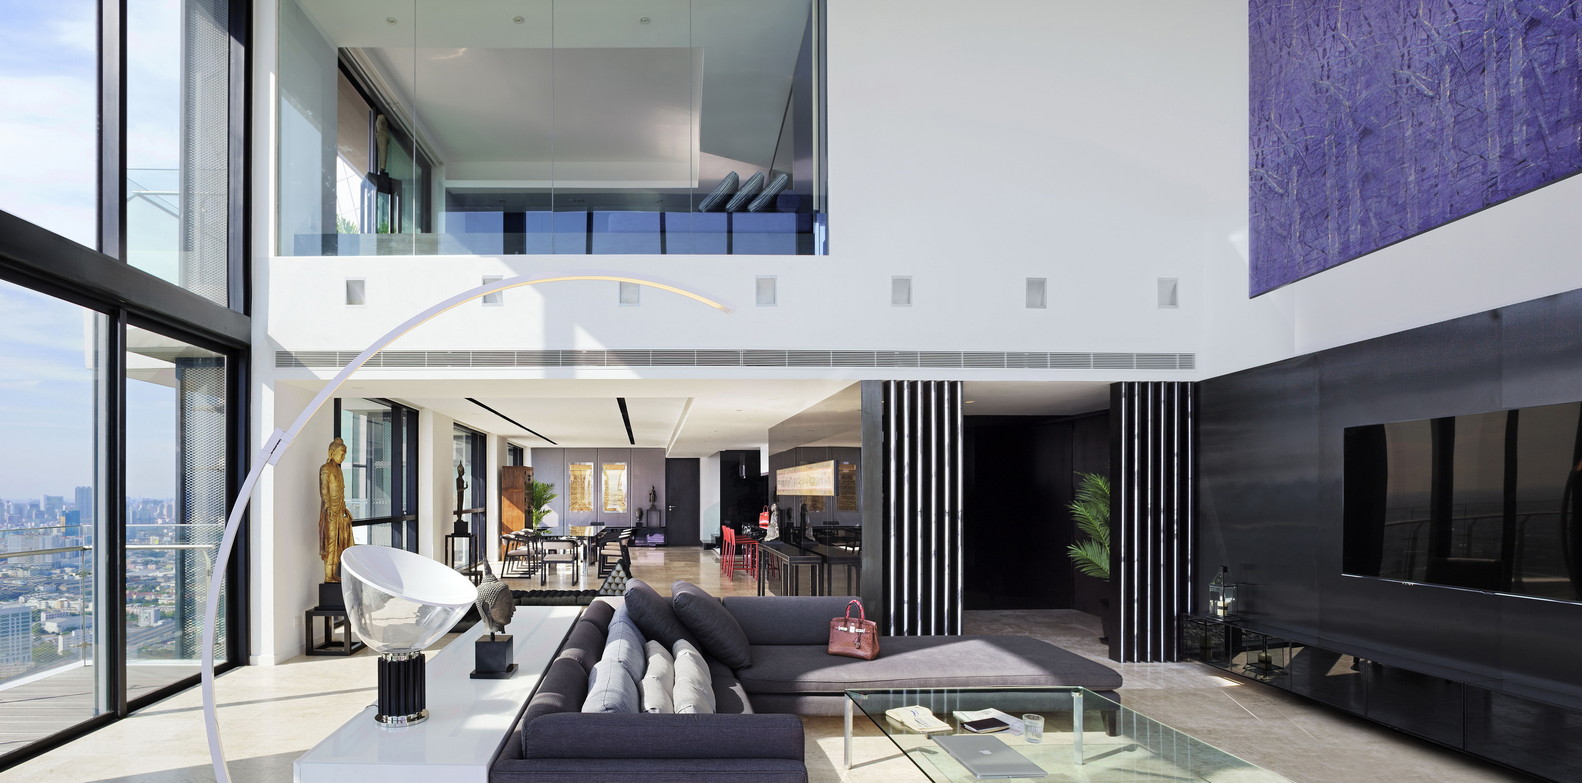 TOPDESIGN_Penthouse_Pano_07_L1_Living_room3